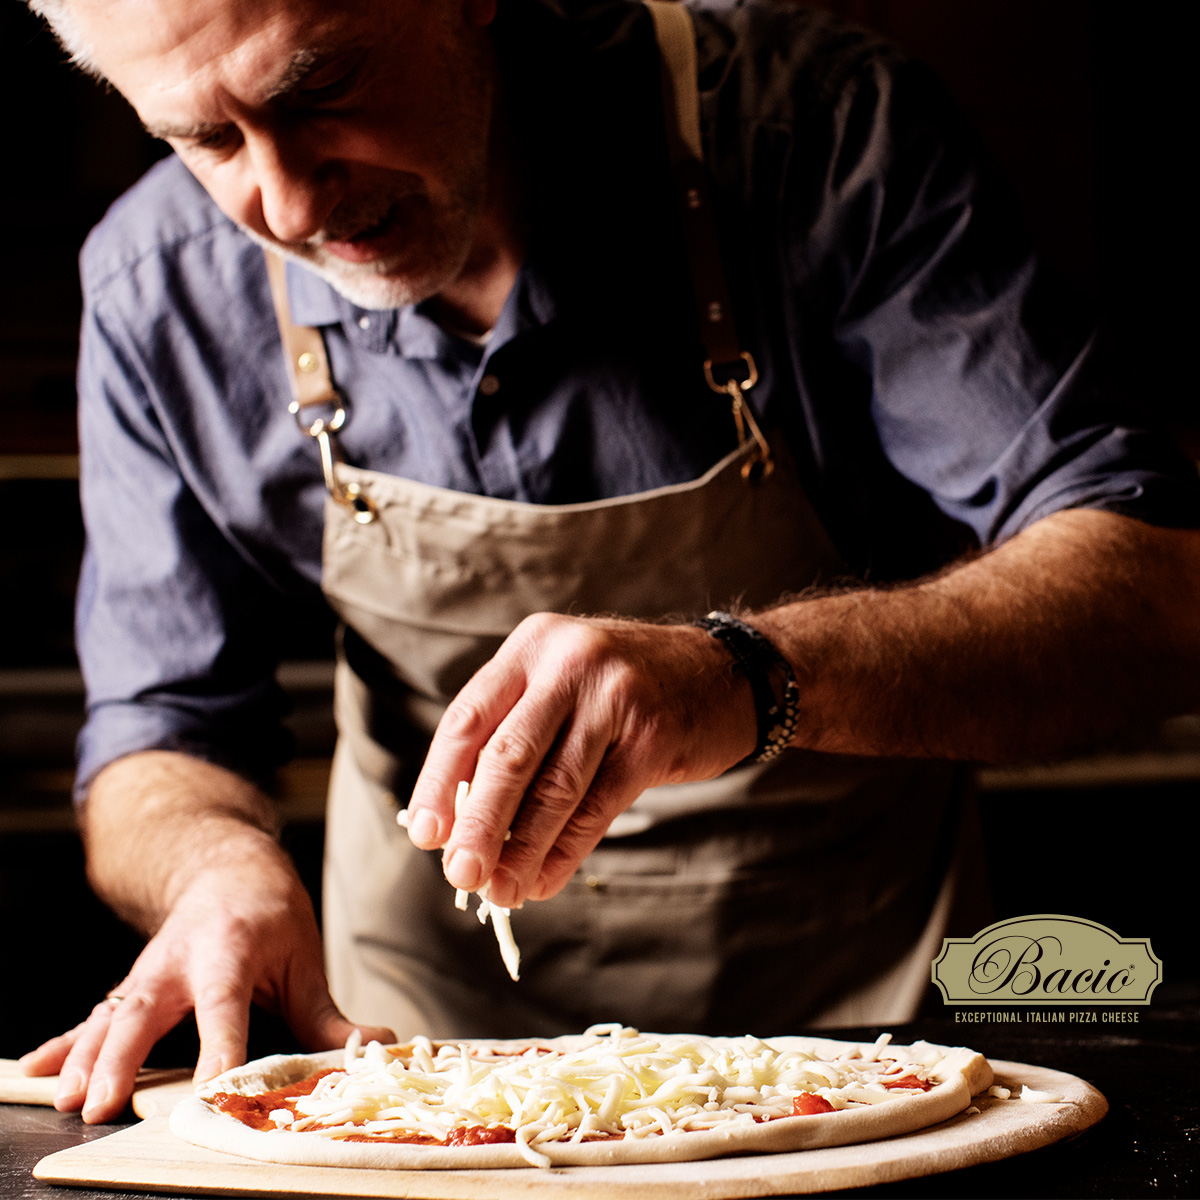 Bacio - Exceptional Italian Pizza Cheese, Man sprinkling cheese on pizza